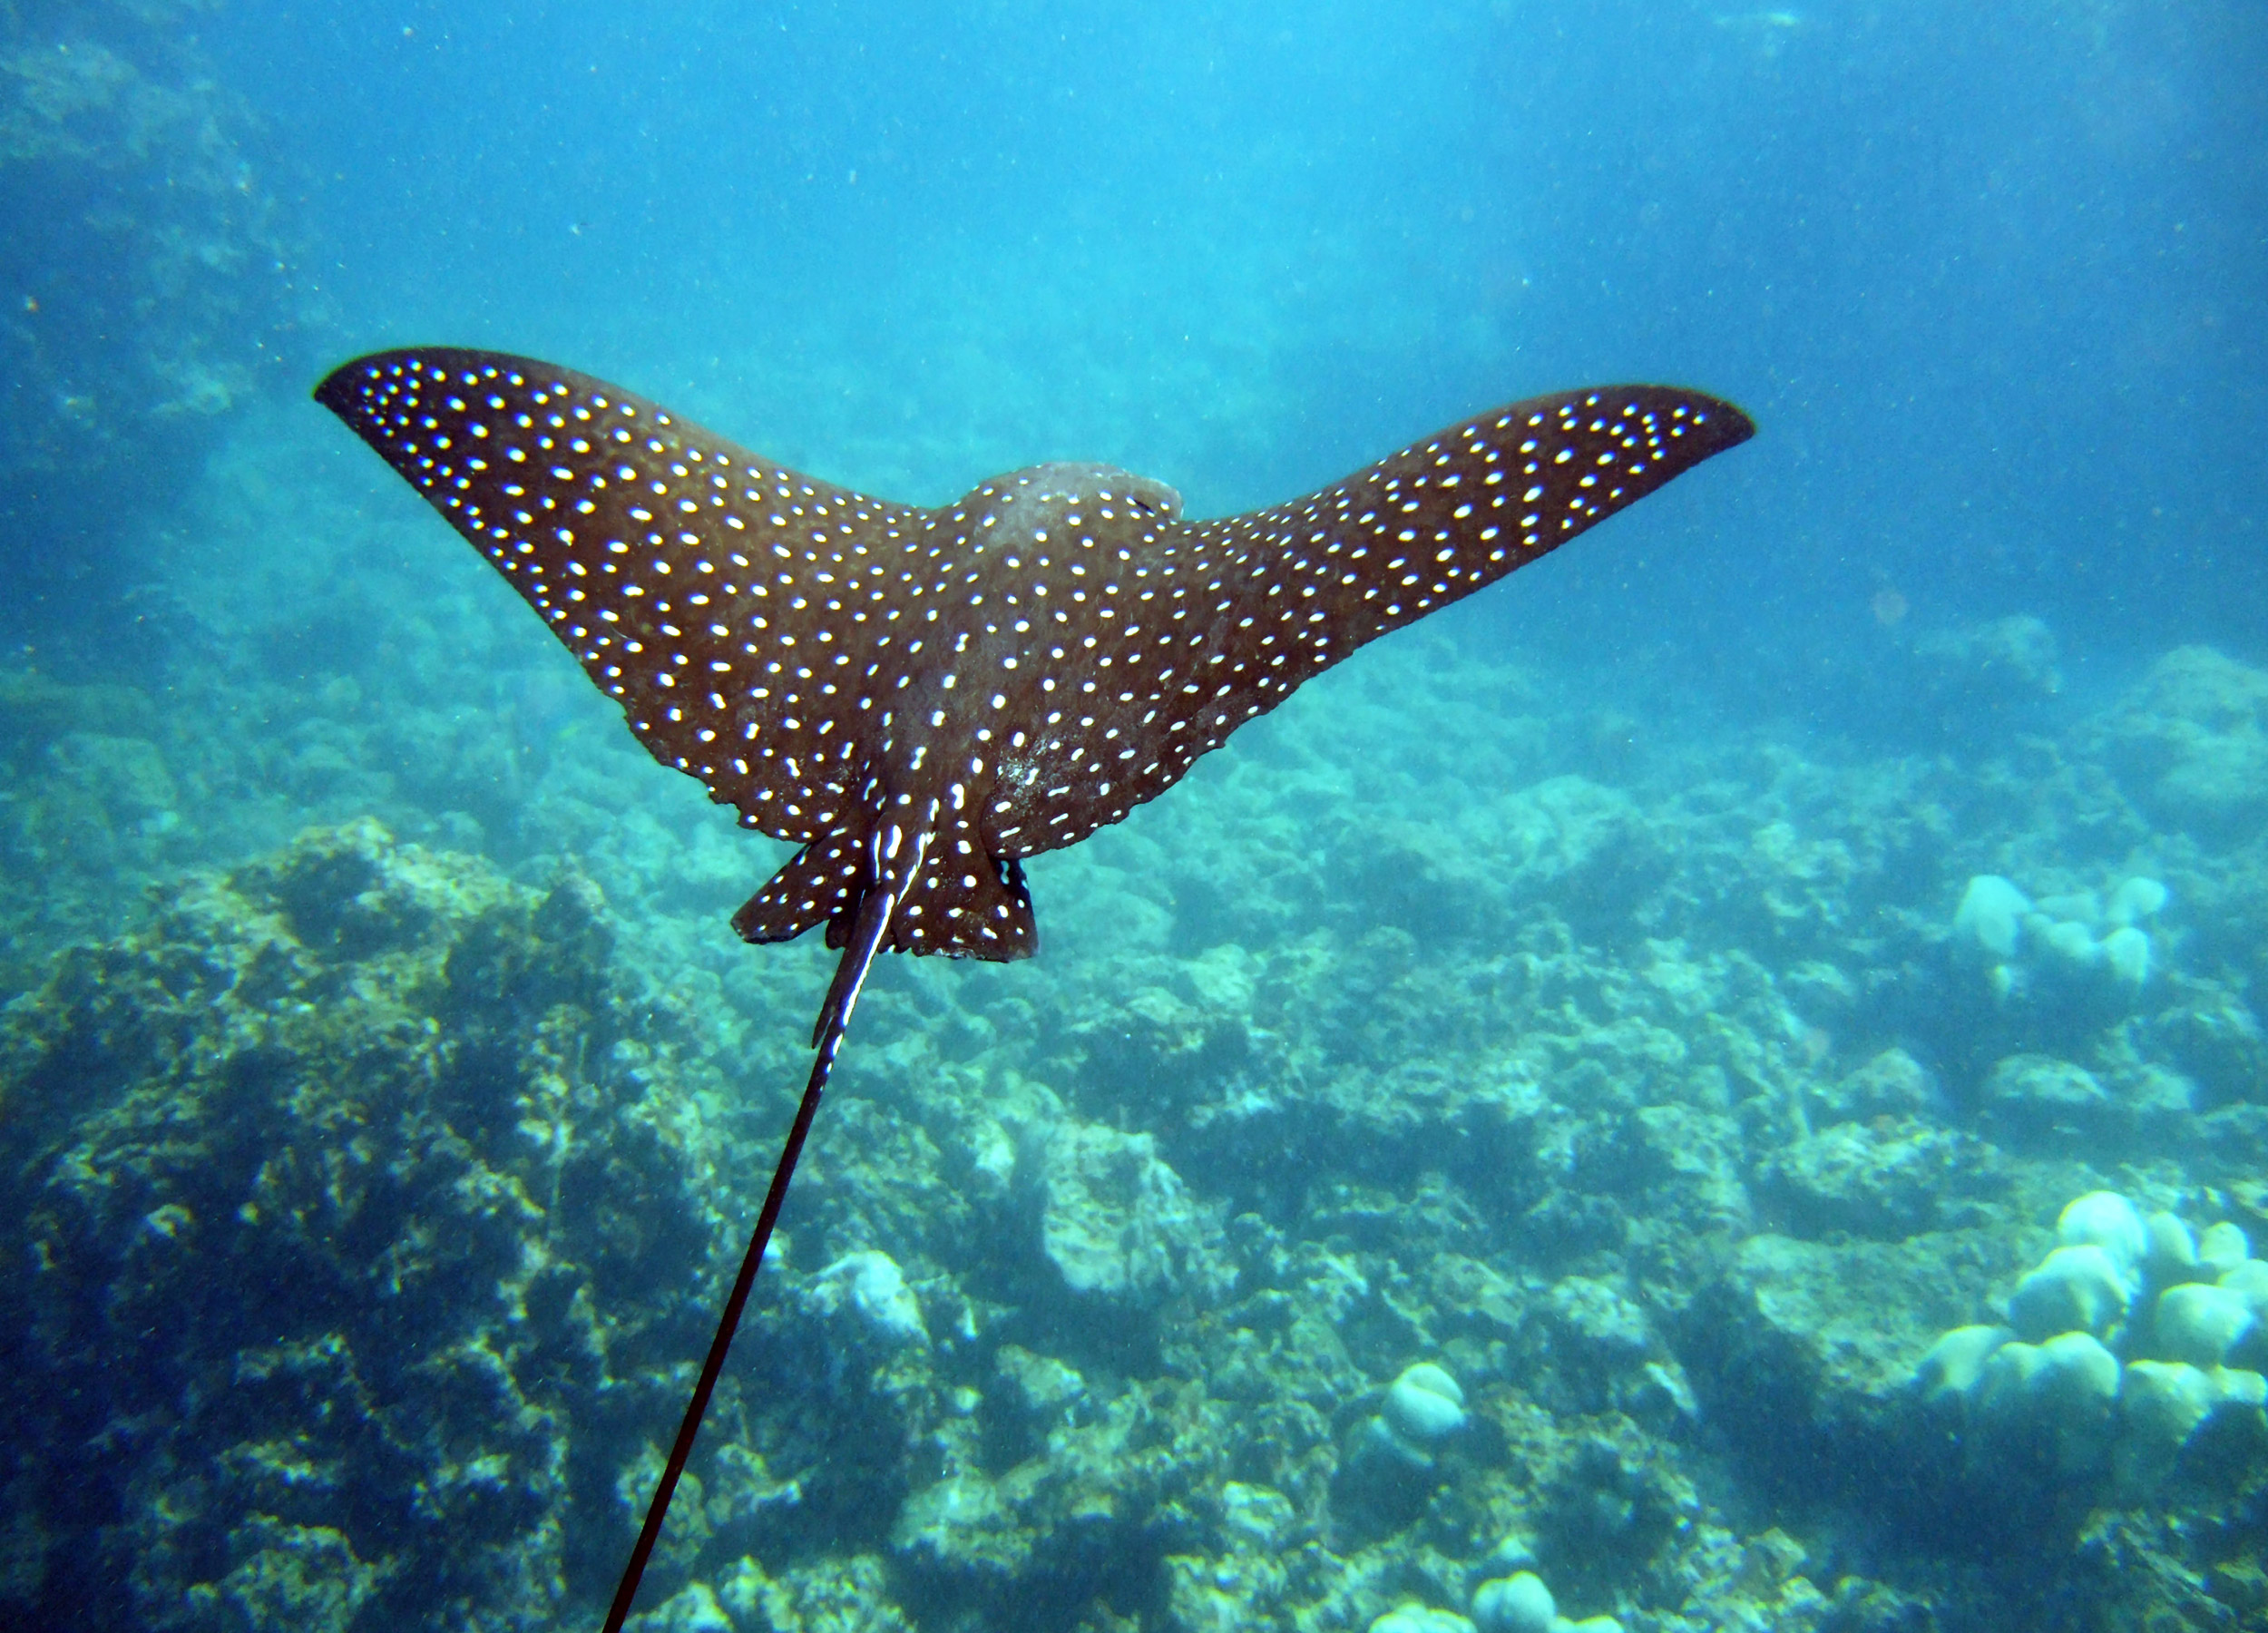 A spotted eagle ray gliding over the rocks and through very blue tropical water.